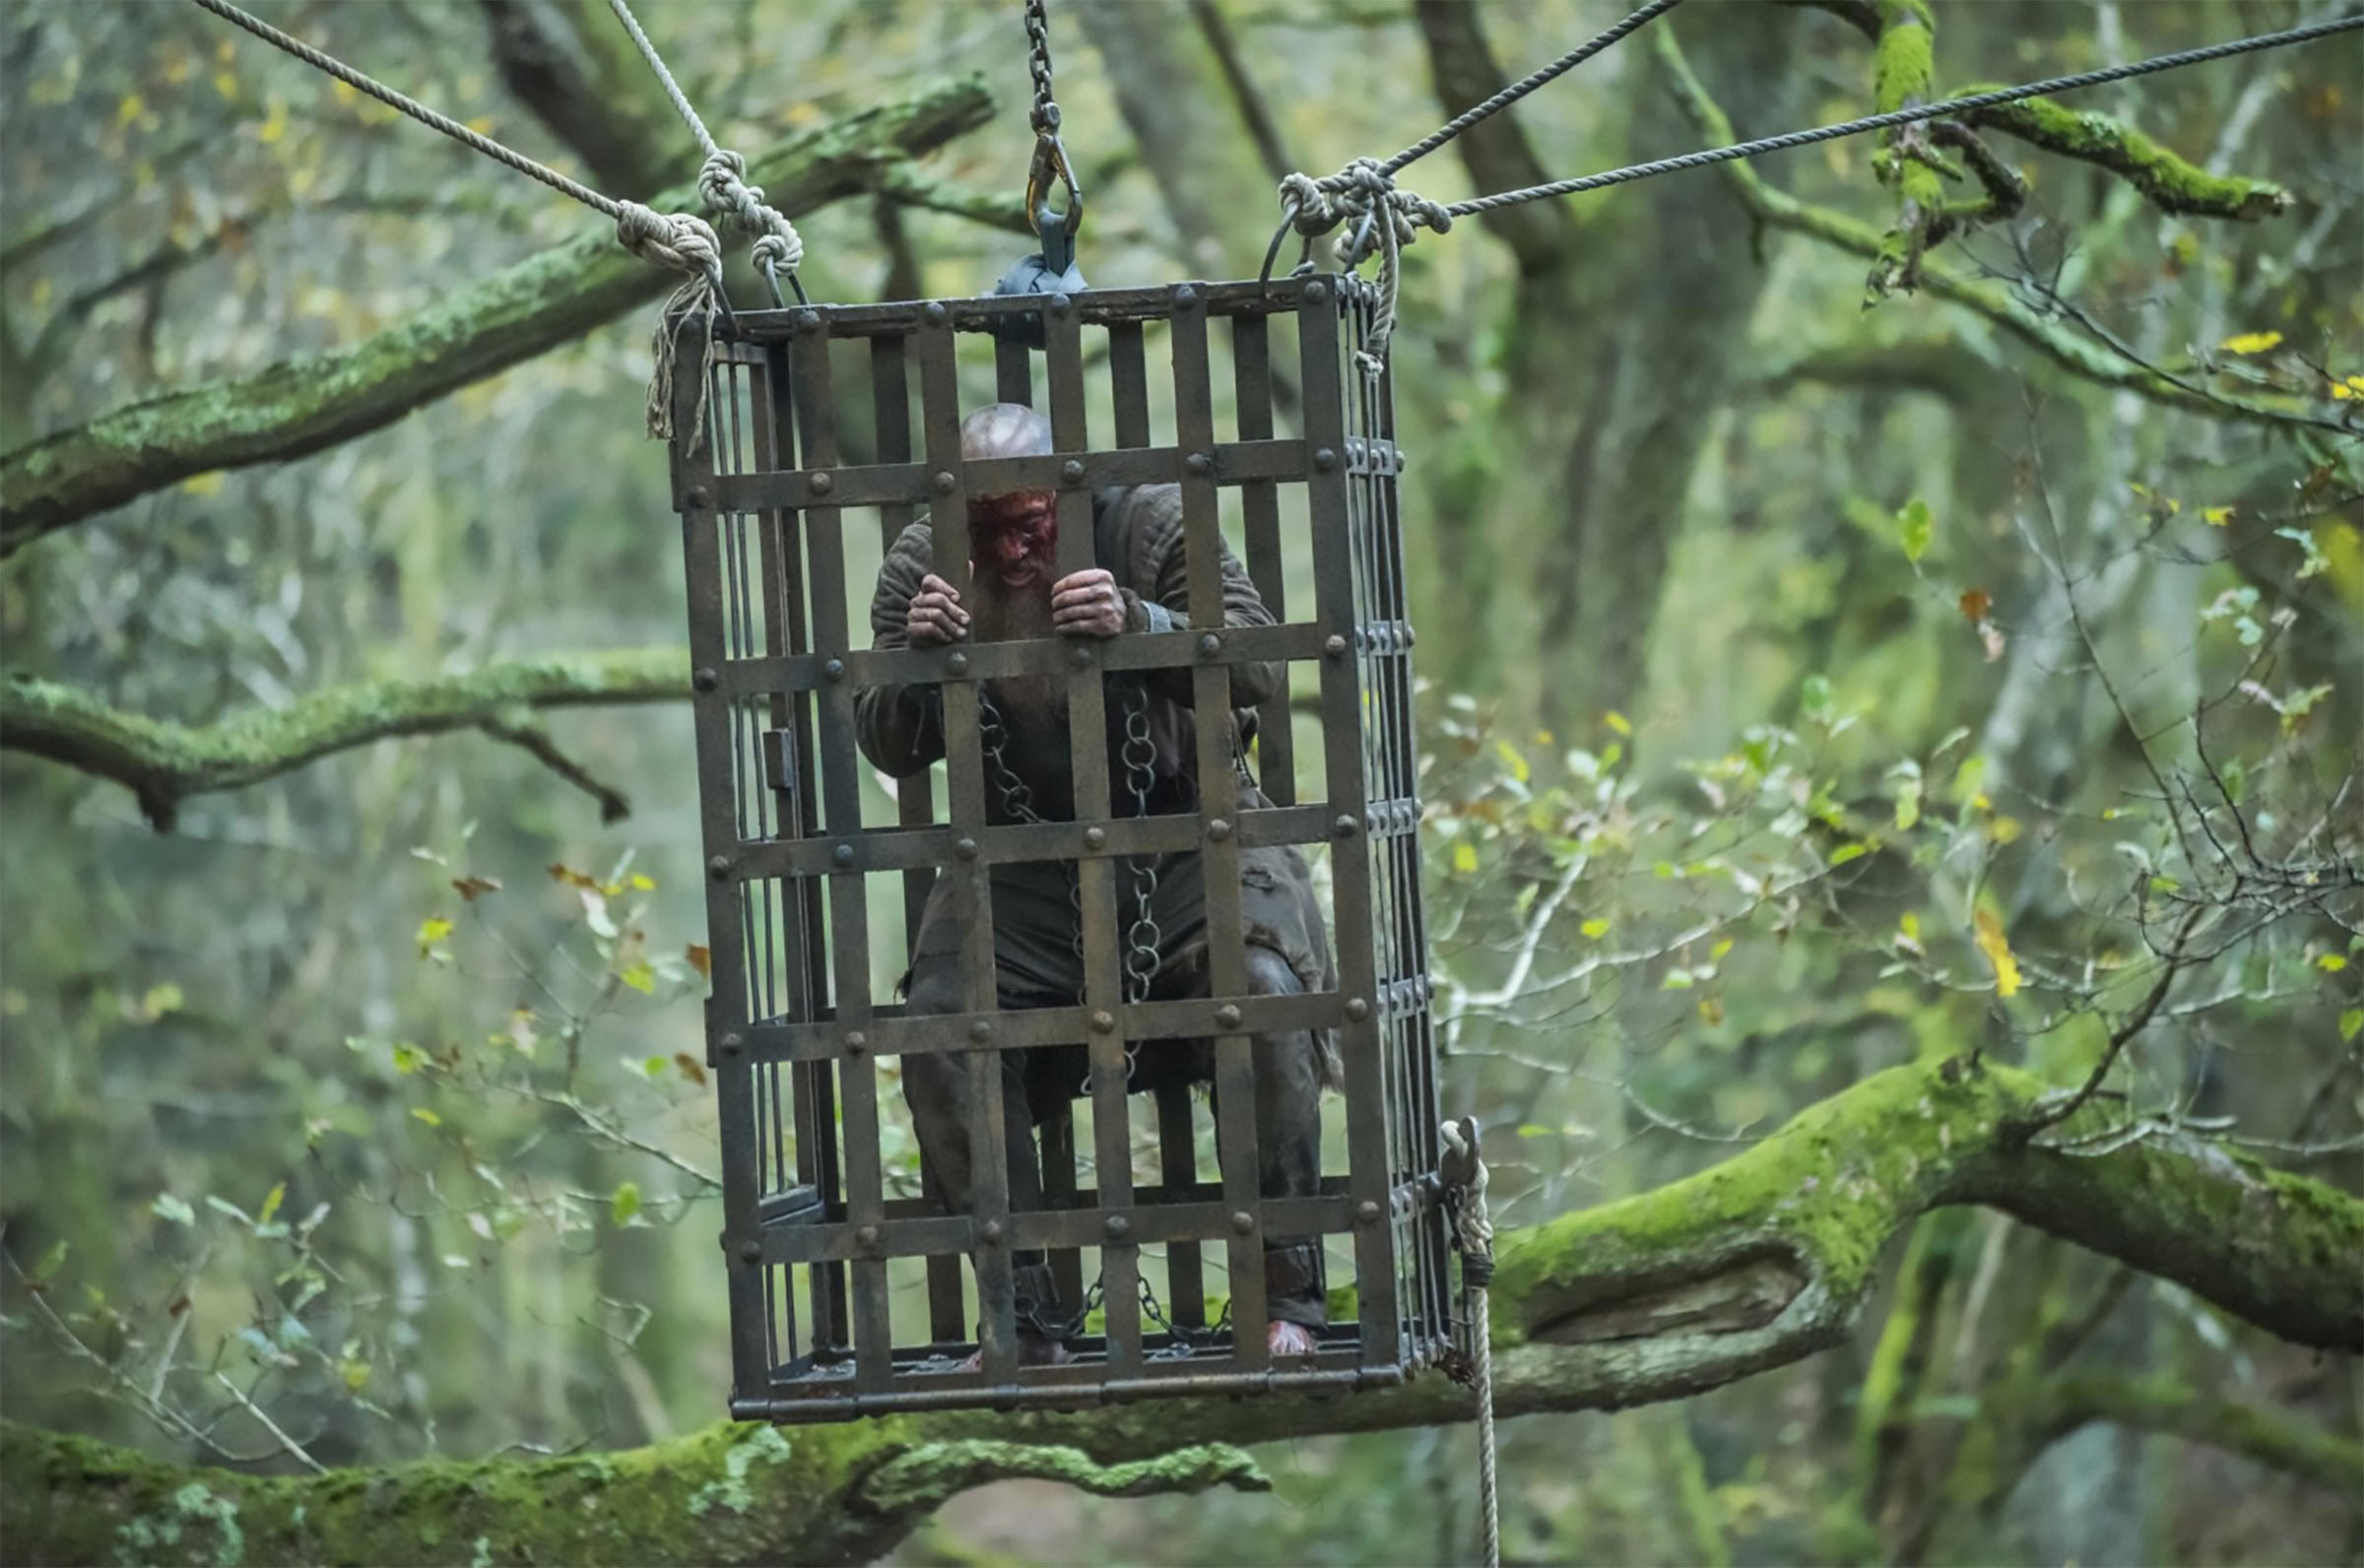 A bald and bearded man is suspended in a cage hanging from a large tree